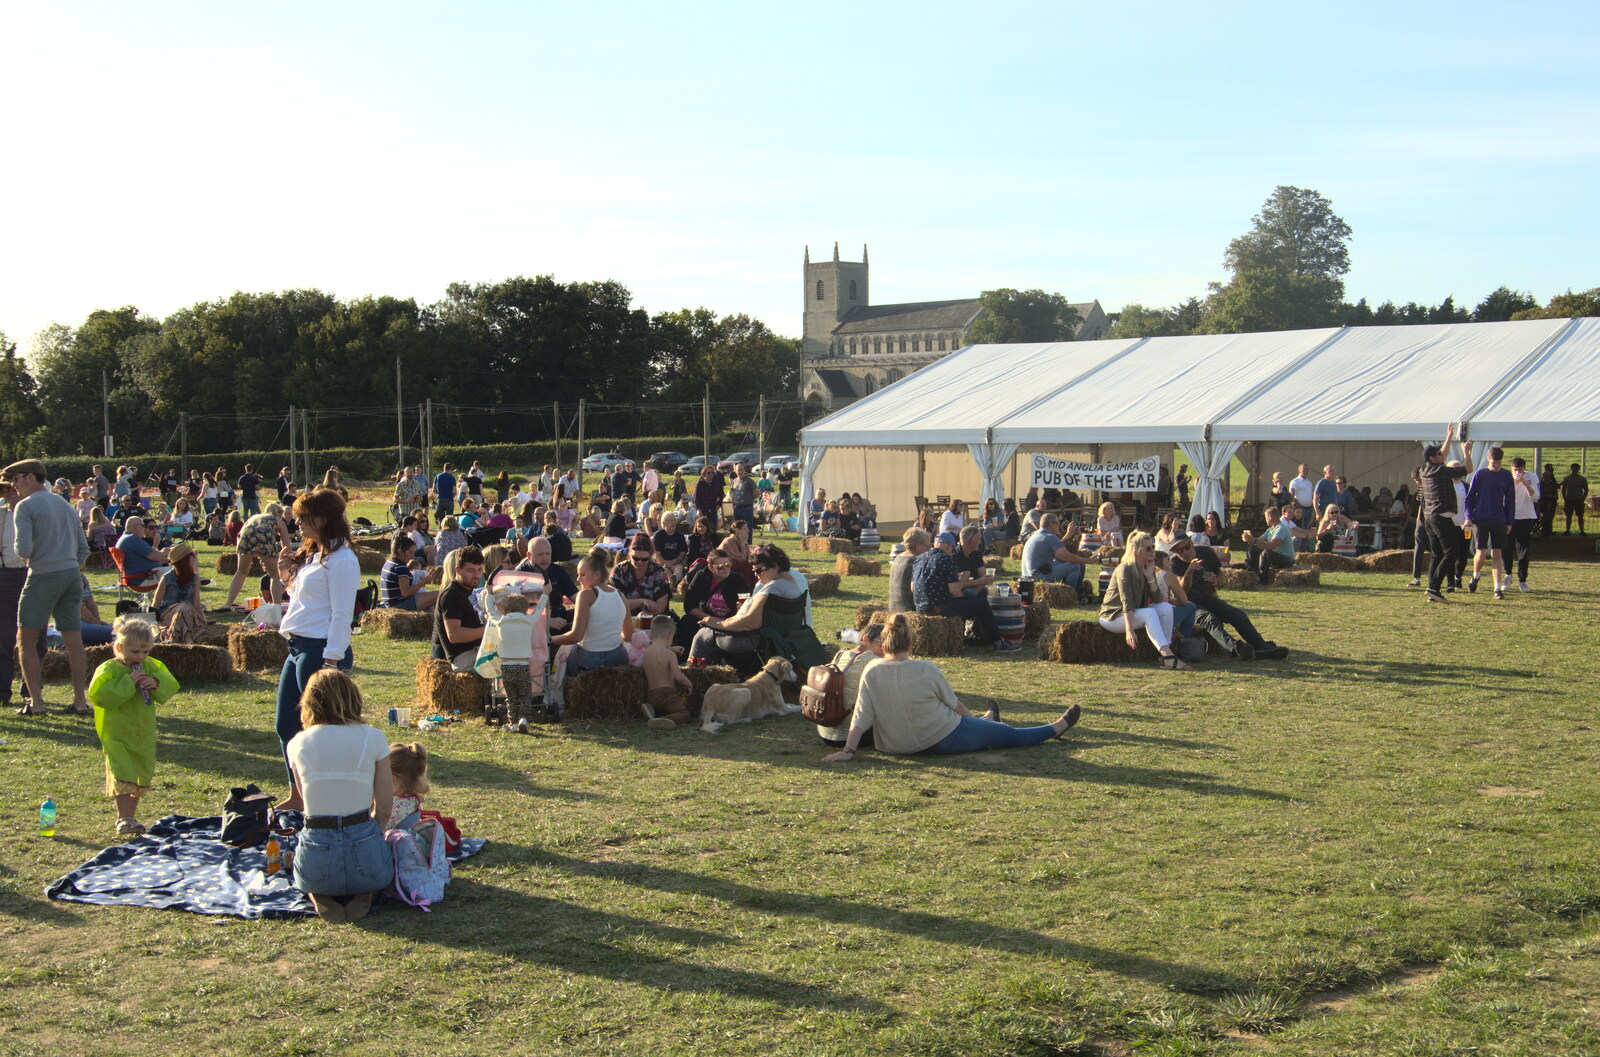 The outdoor crowds from Star Wing's Hops and Hogs Festival, Redgrave, Suffolk - 12th September 2020